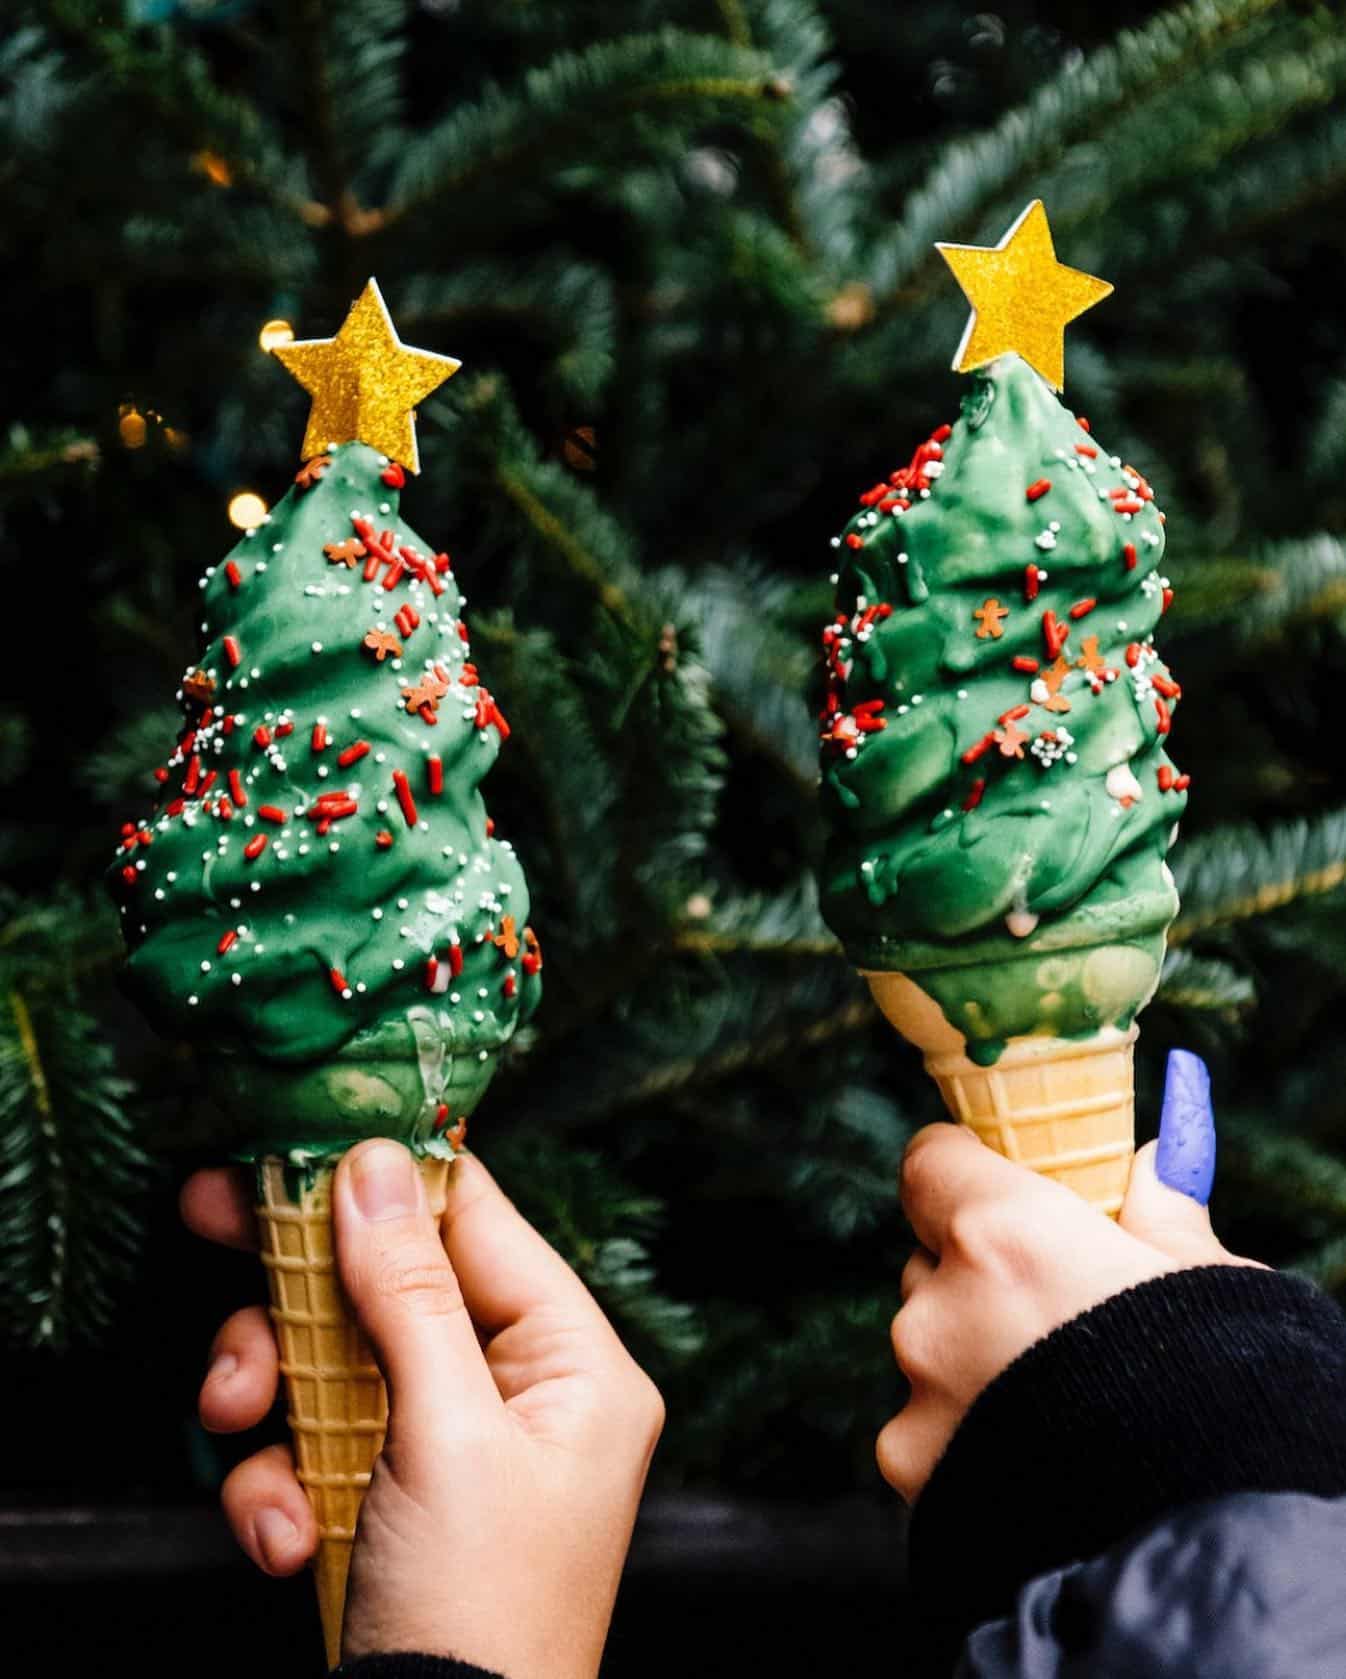 Seasonally sweet. Holiday cheer. The Grinch cone → now available @eatmisterdips for this month only.